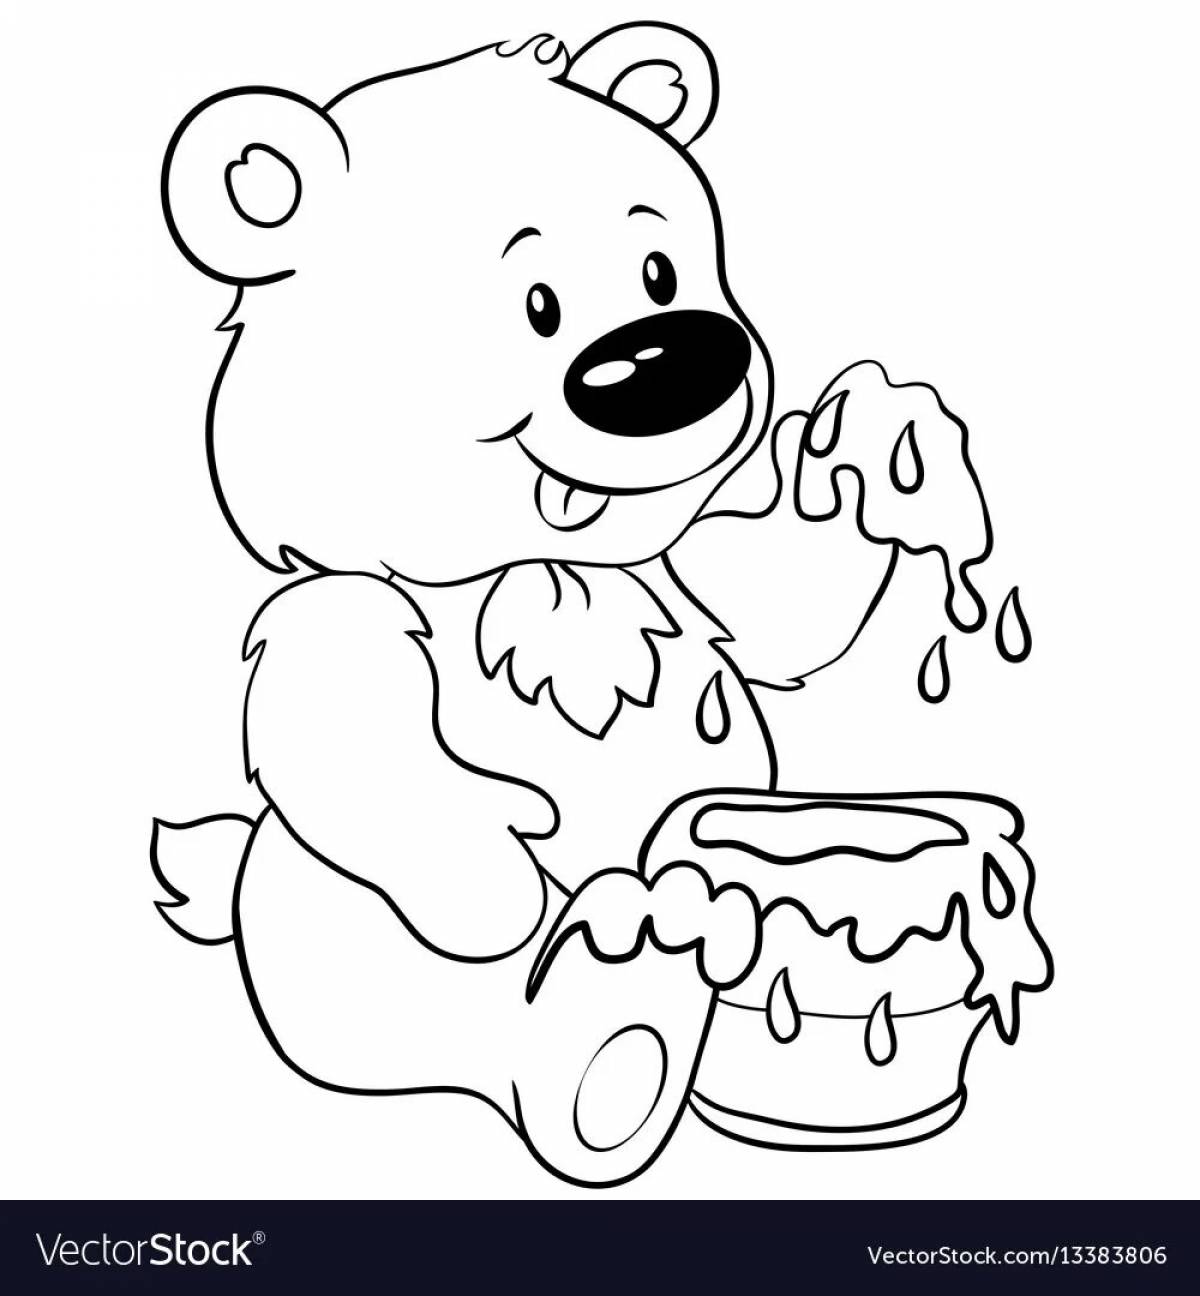 Colouring awesome bear with honey